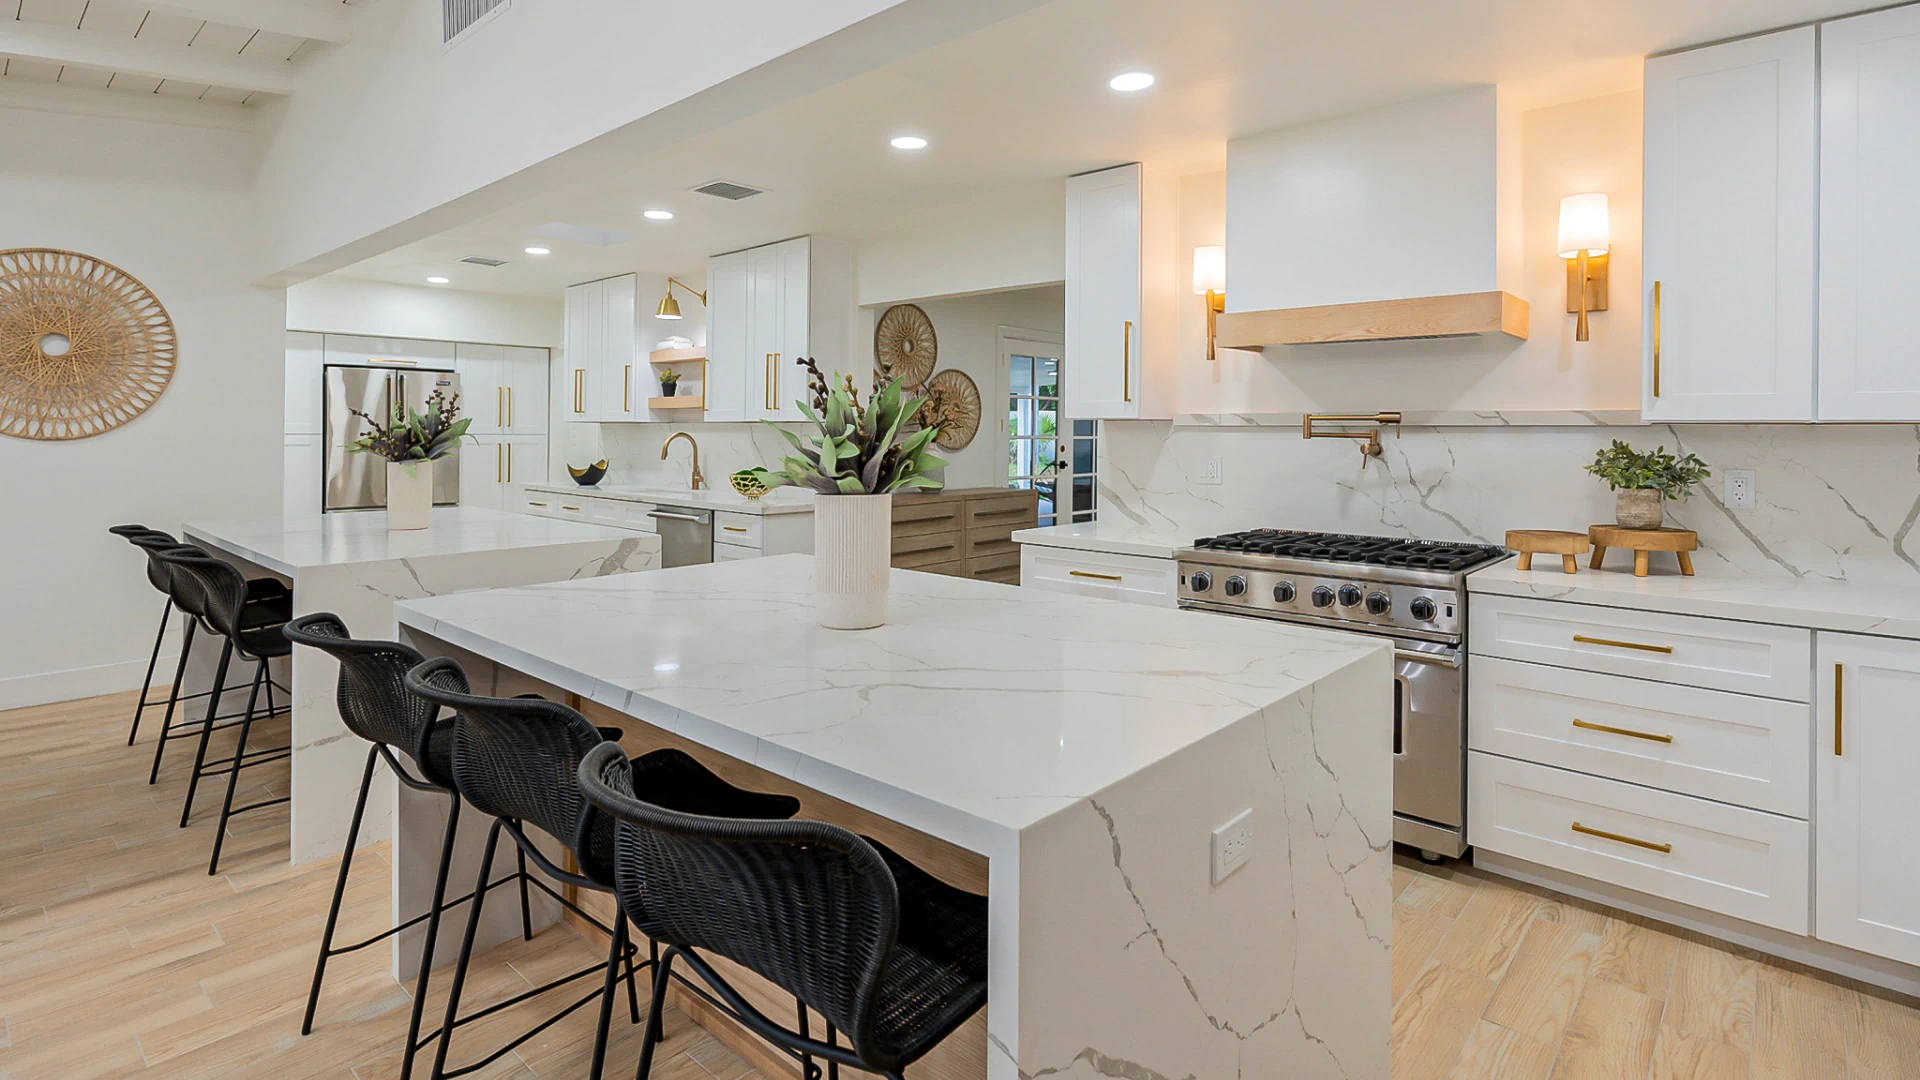 luxurious residential house kitchen with bright lighting and clean white cabinets and countertop